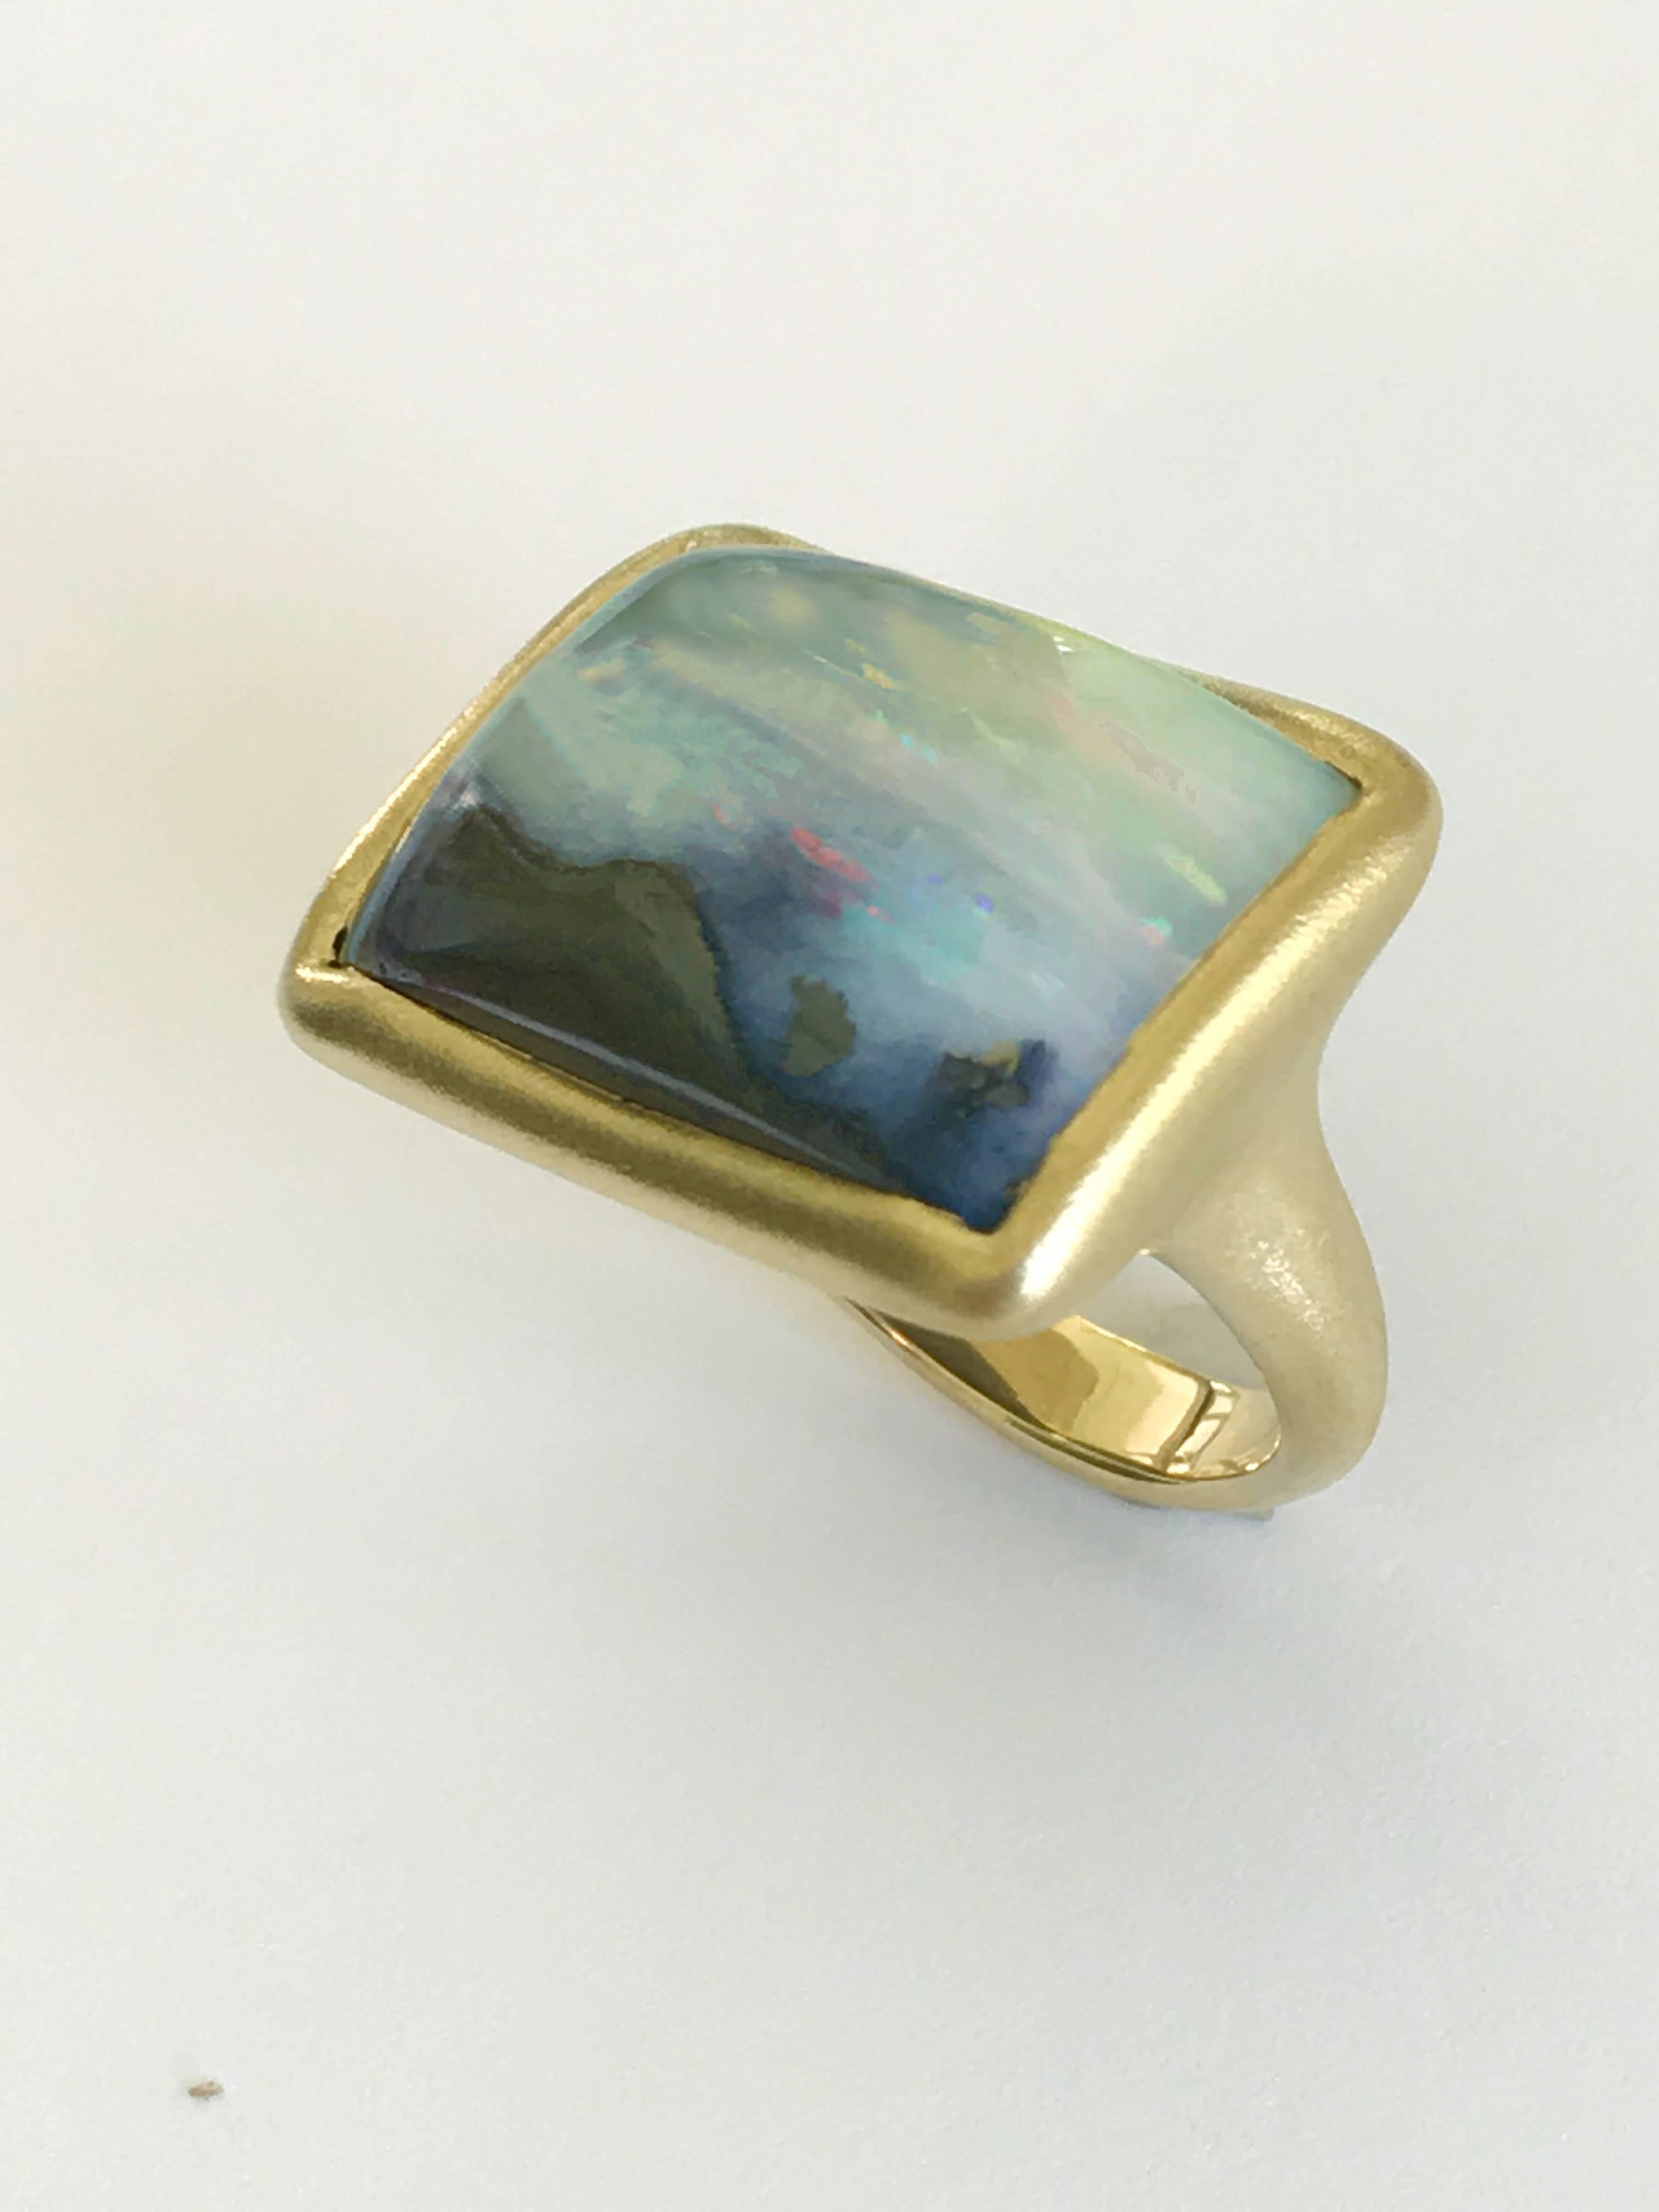 Dalben design One of a kind 18k yellow gold matte finishing ring with a ct. 19,45 bezel-set Boulder Opal. 
This Australian Boulder Opal looks like a sunrise landscape. 
Ring size 7 1/4 USA - 55 EU re-sizable to most finger sizes.  
Bezel setting